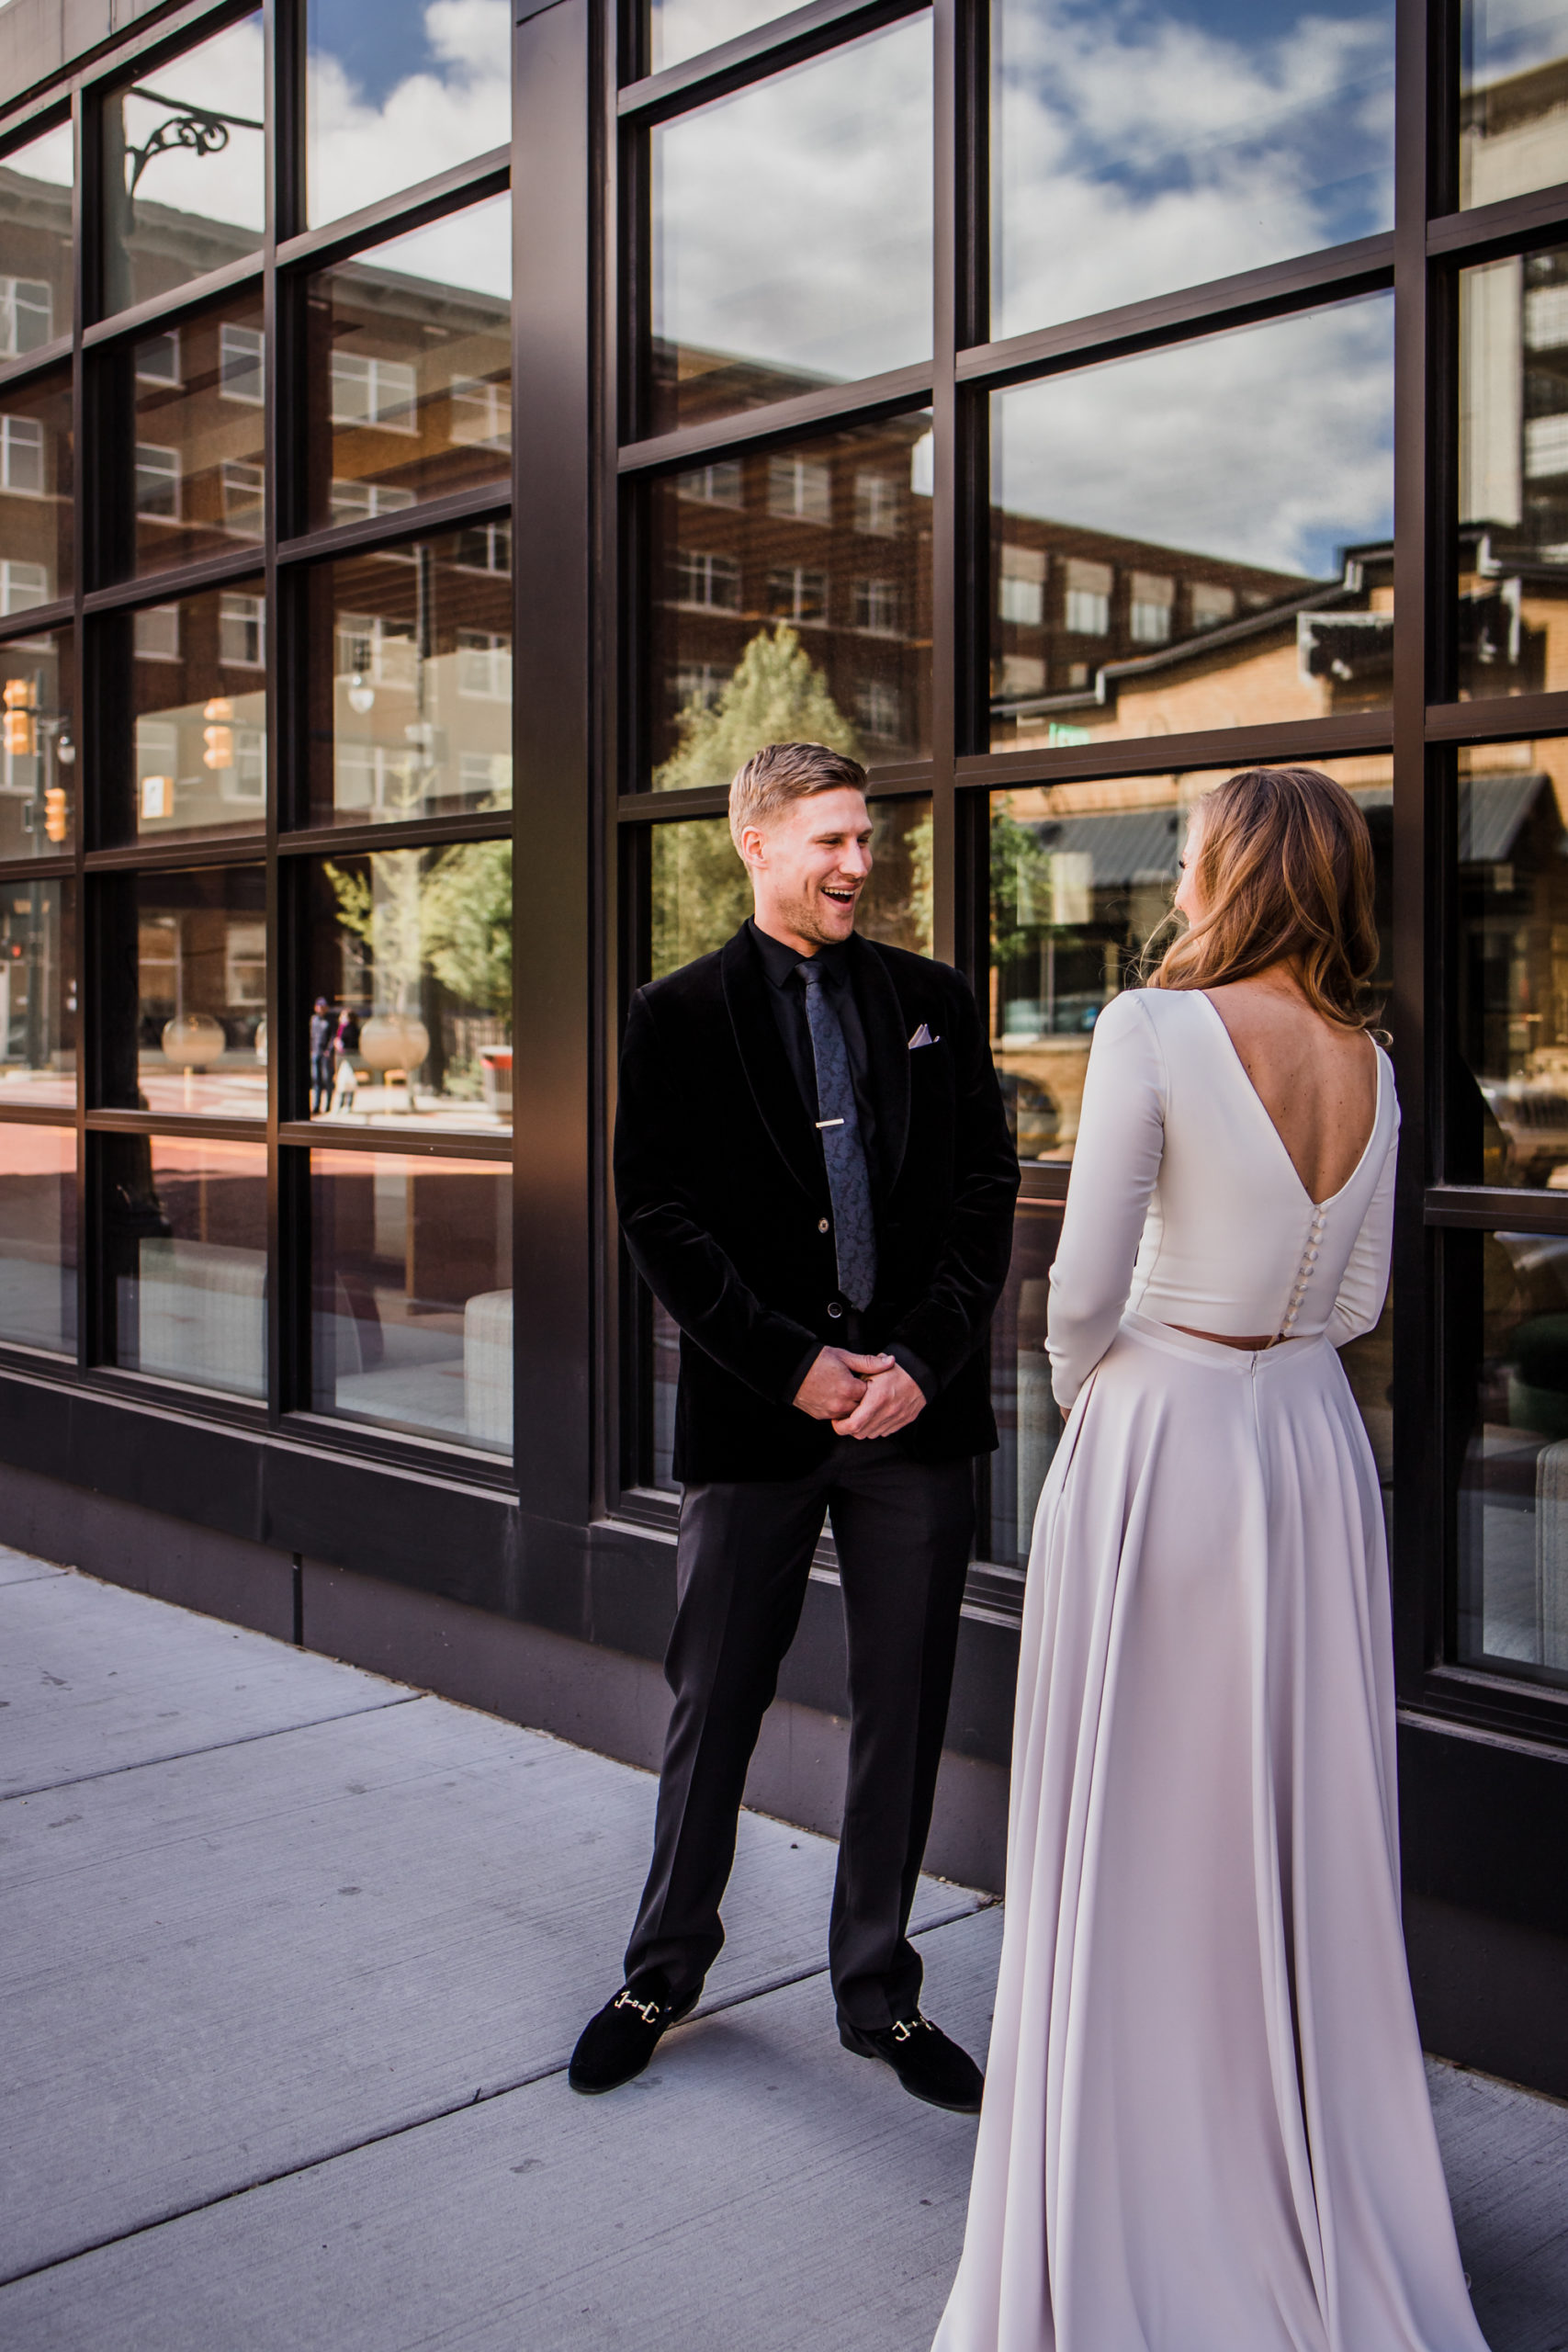 First look at The Rutledge Wedding Grand Rapids